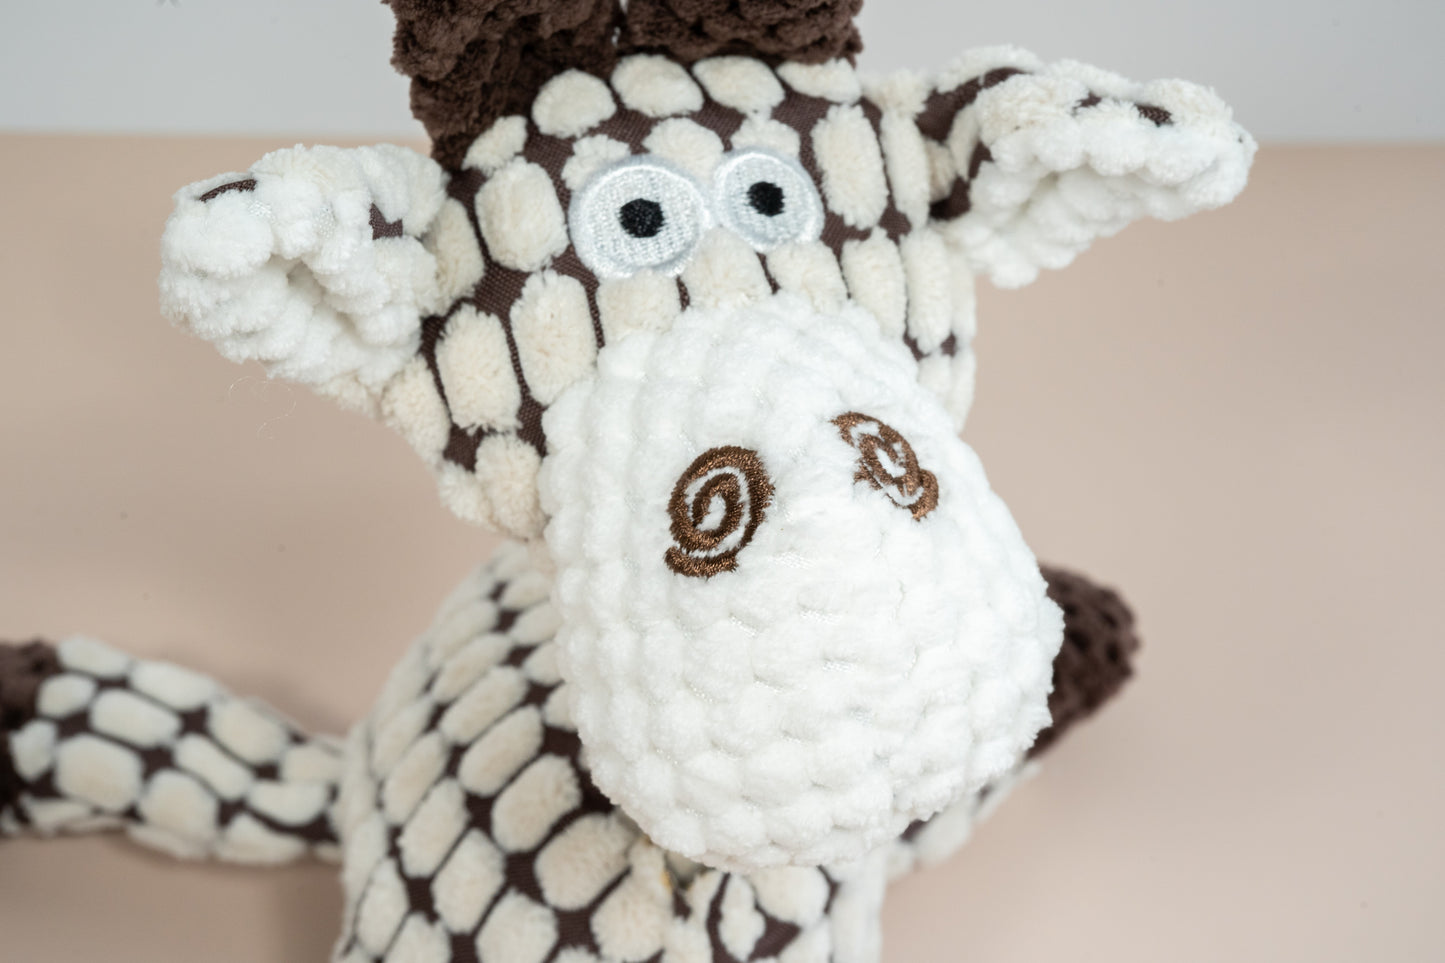 Close-up view of giraffe plush face with rope neck.